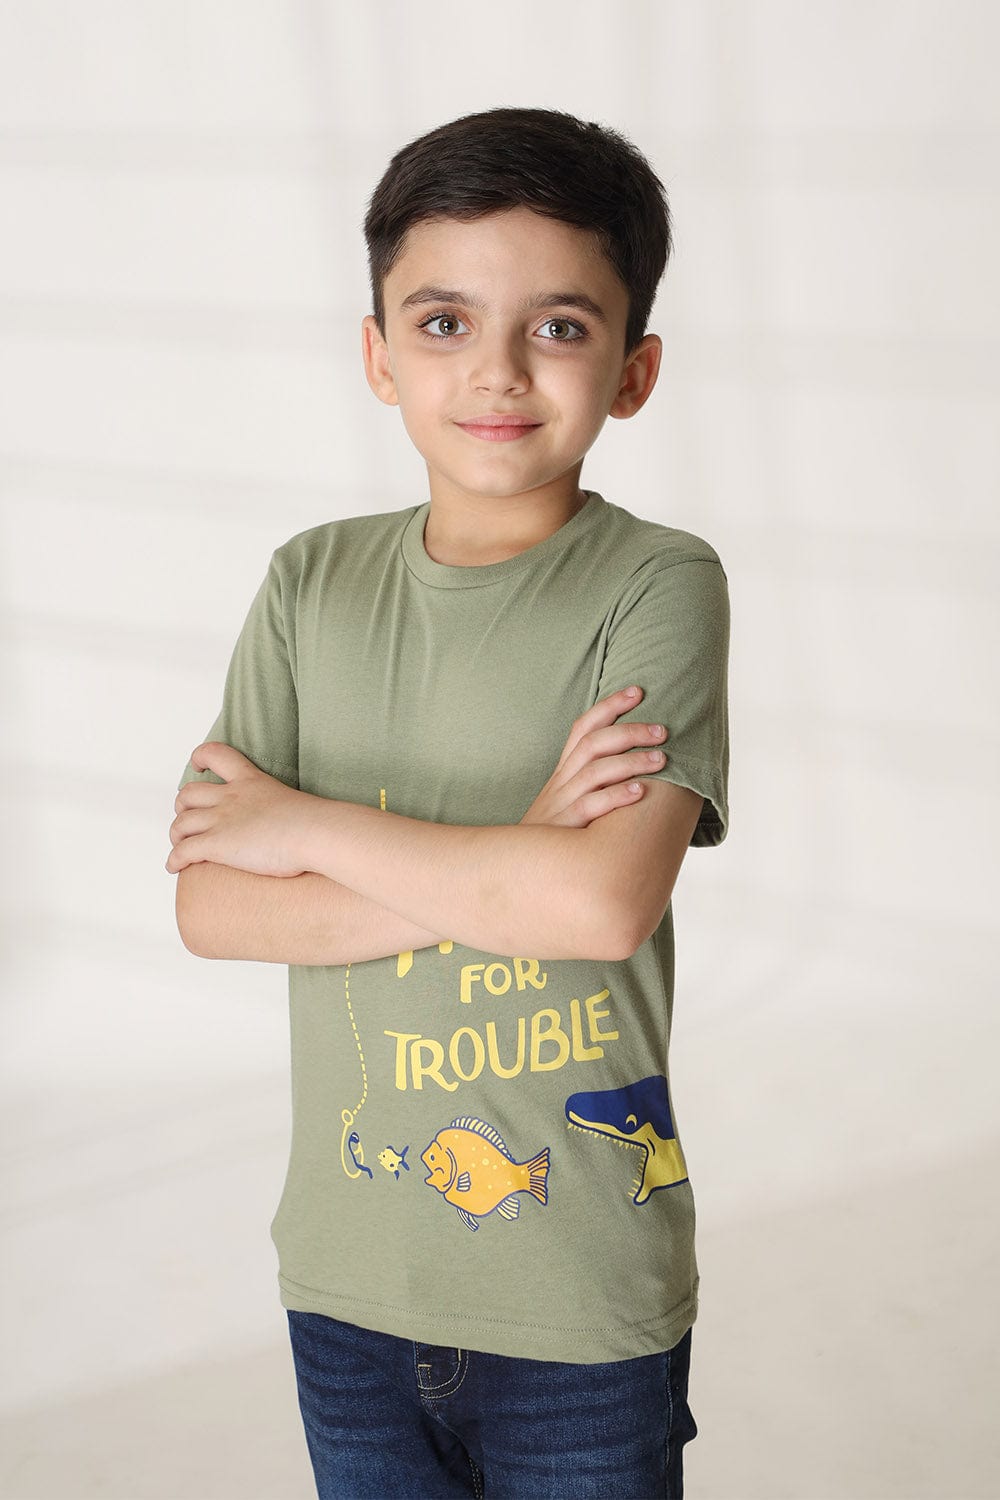 Hope Not Out by Shahid Afridi Boys Knit T-Shirt Boys' Fishing Graphic Grey Half Sleeve Tee